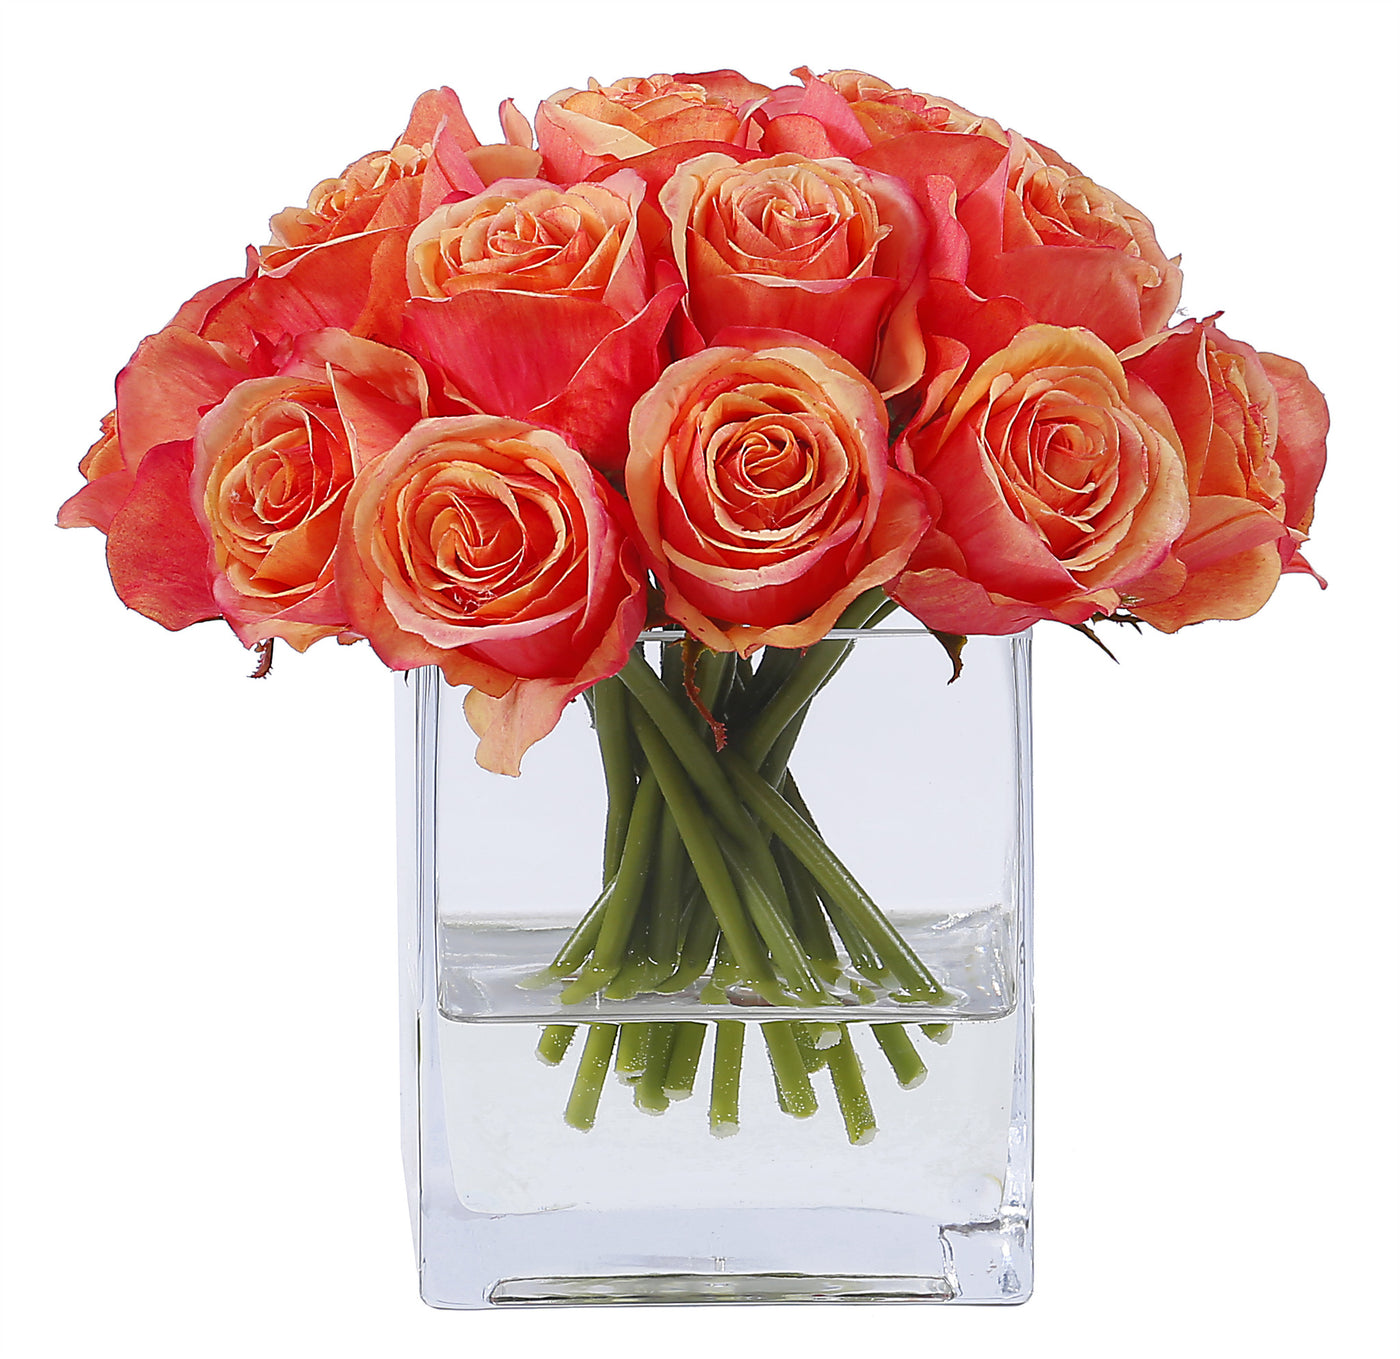 ROSE BUD IN SQUARE GLASS 8.5'' (WHI009-PCRD) - Winward Home faux floral arrangements